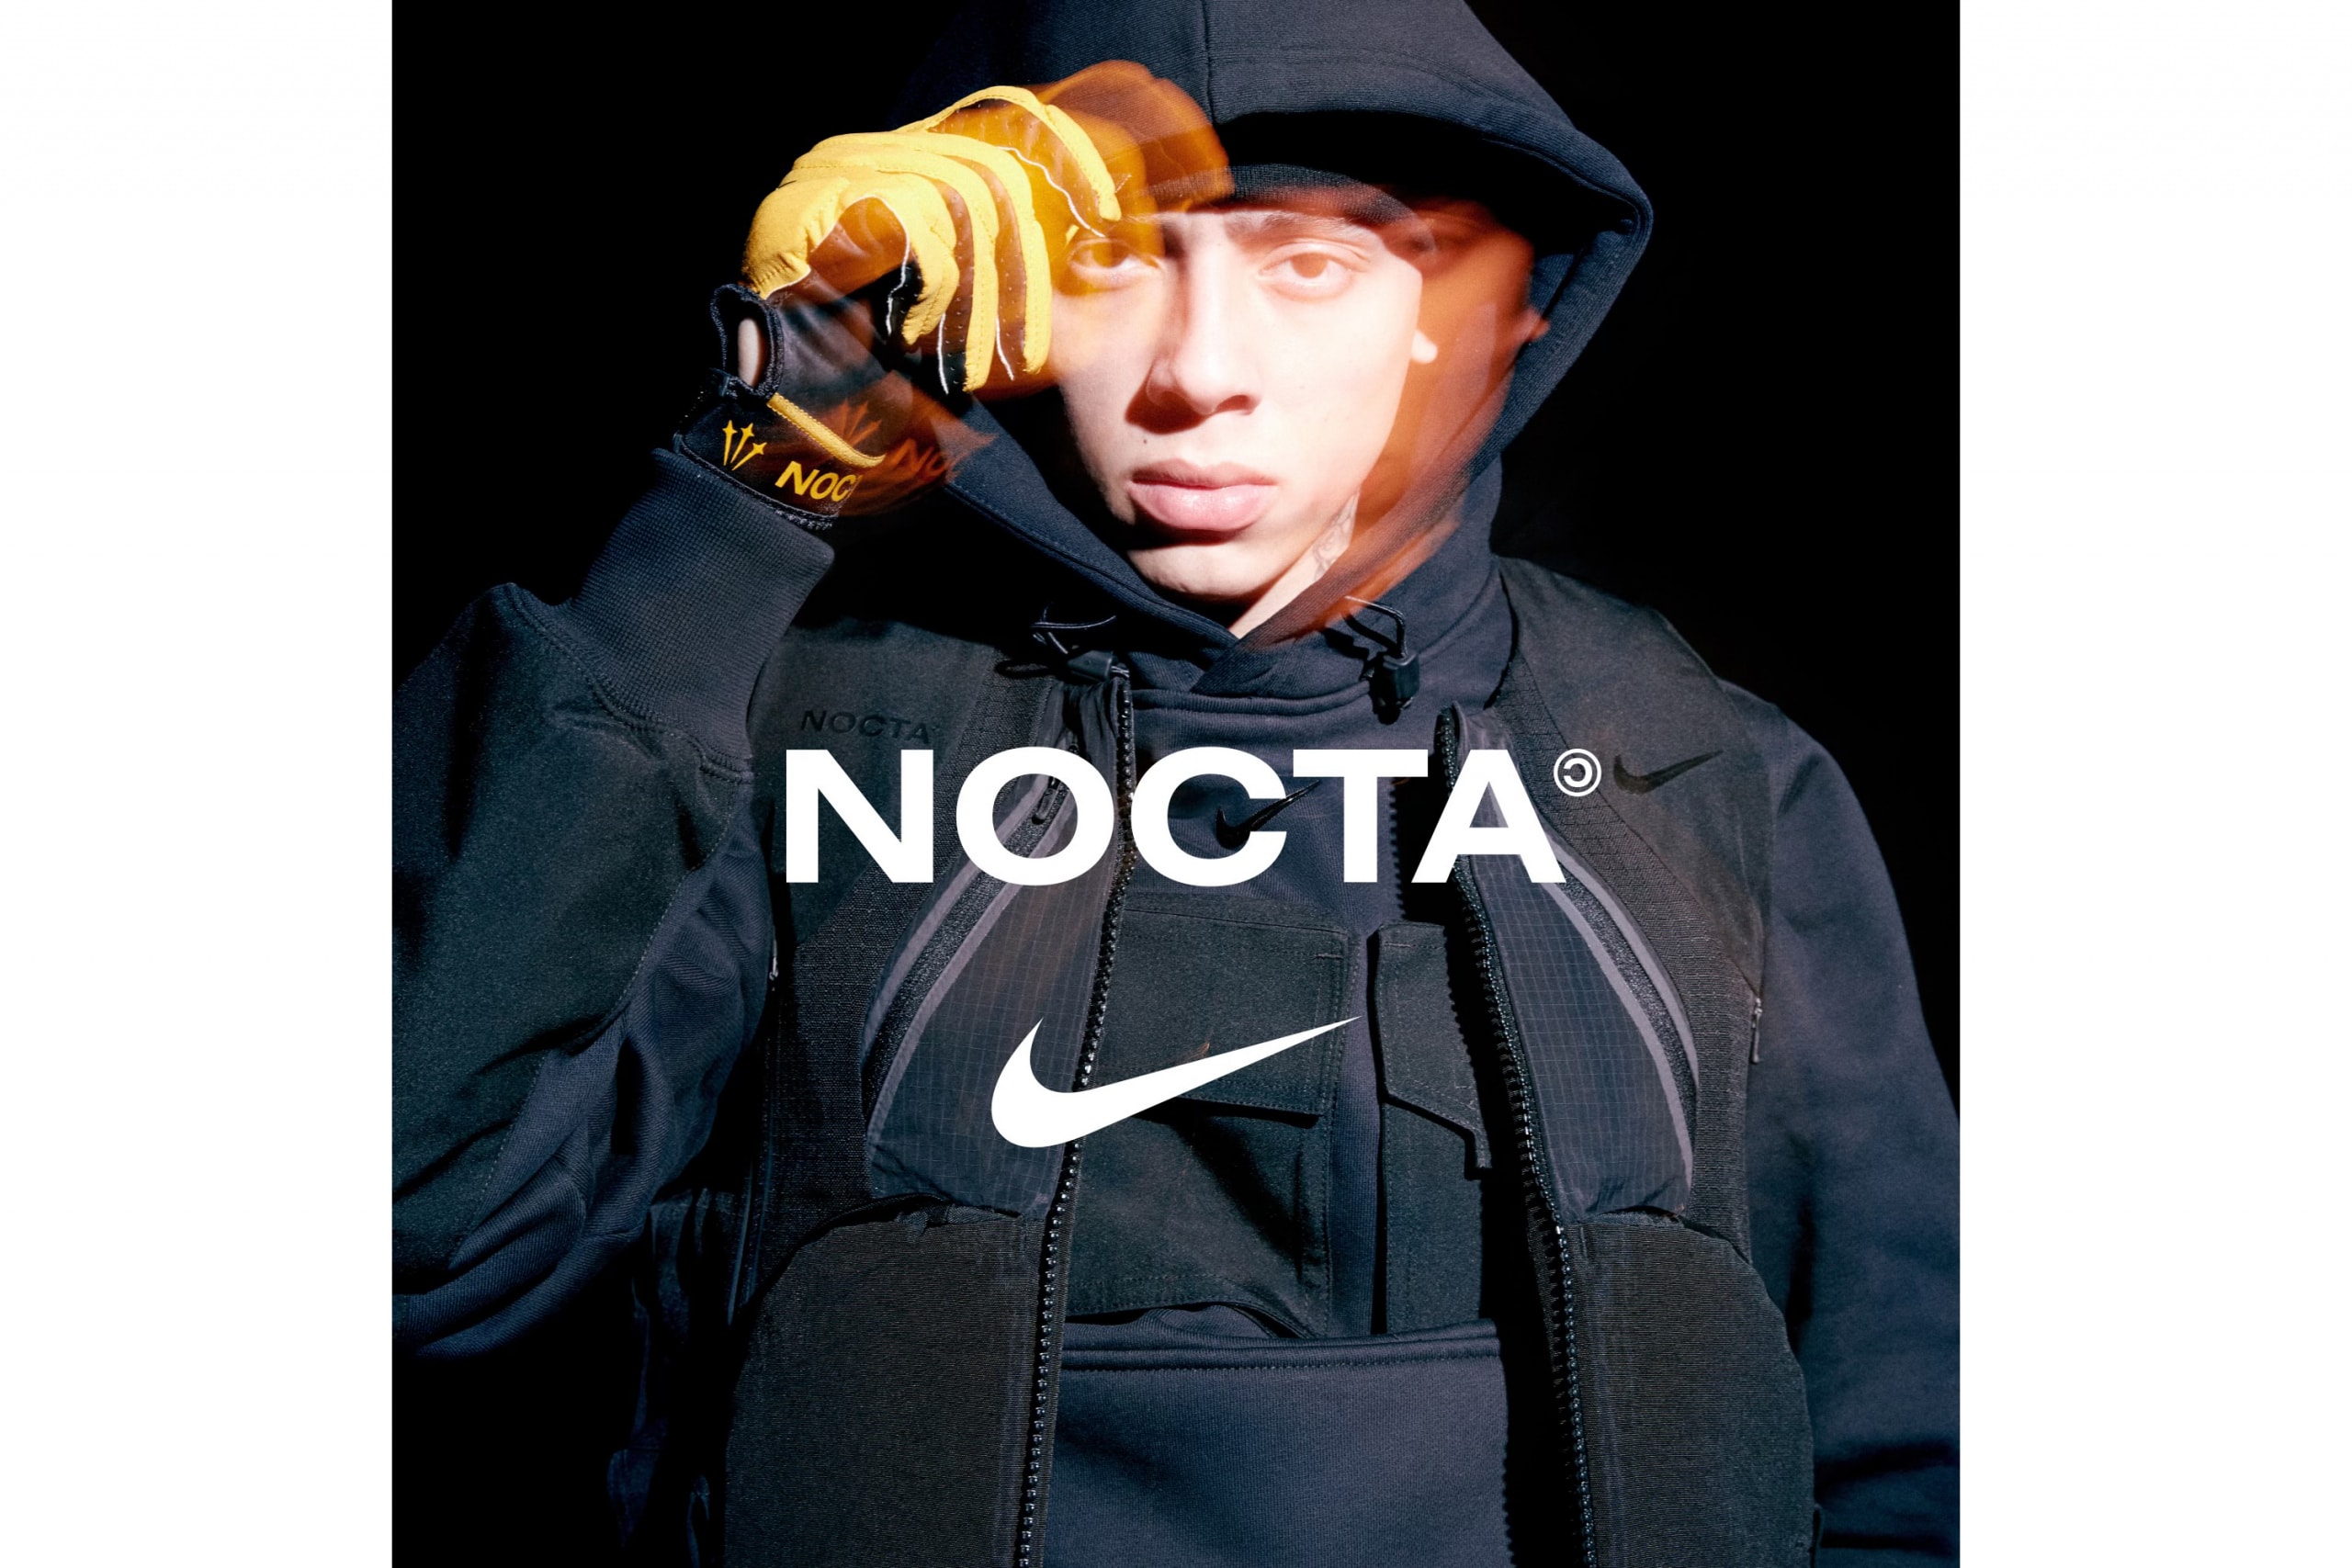 Drake Teams Up With Nike for Nocta Drop 2